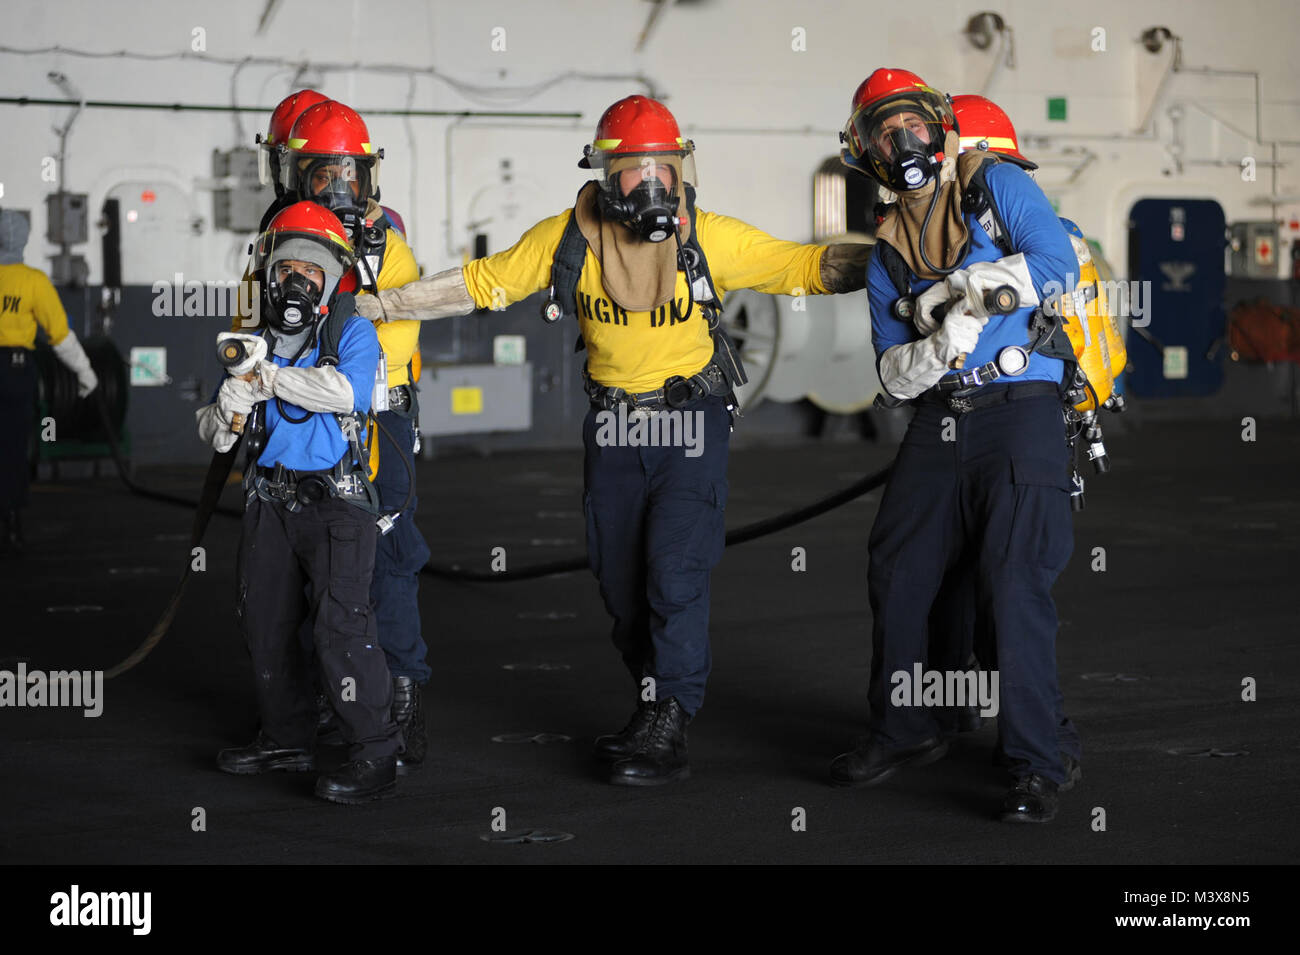 PACIFIC OCEAN (July 25, 2014) Sailors practice firefighting during a drill in the hangar bay of the aircraft carrier USS Nimitz (CVN 68). Nimitz is currently underway conducting routine training and exercises. (U.S. Navy photo by Mass Communication Specialist 3rd Class Siobhana R. McEwen/Released) 140724-N-MX772-056.jpg by USS NIMITZ (CVN 68) Stock Photo